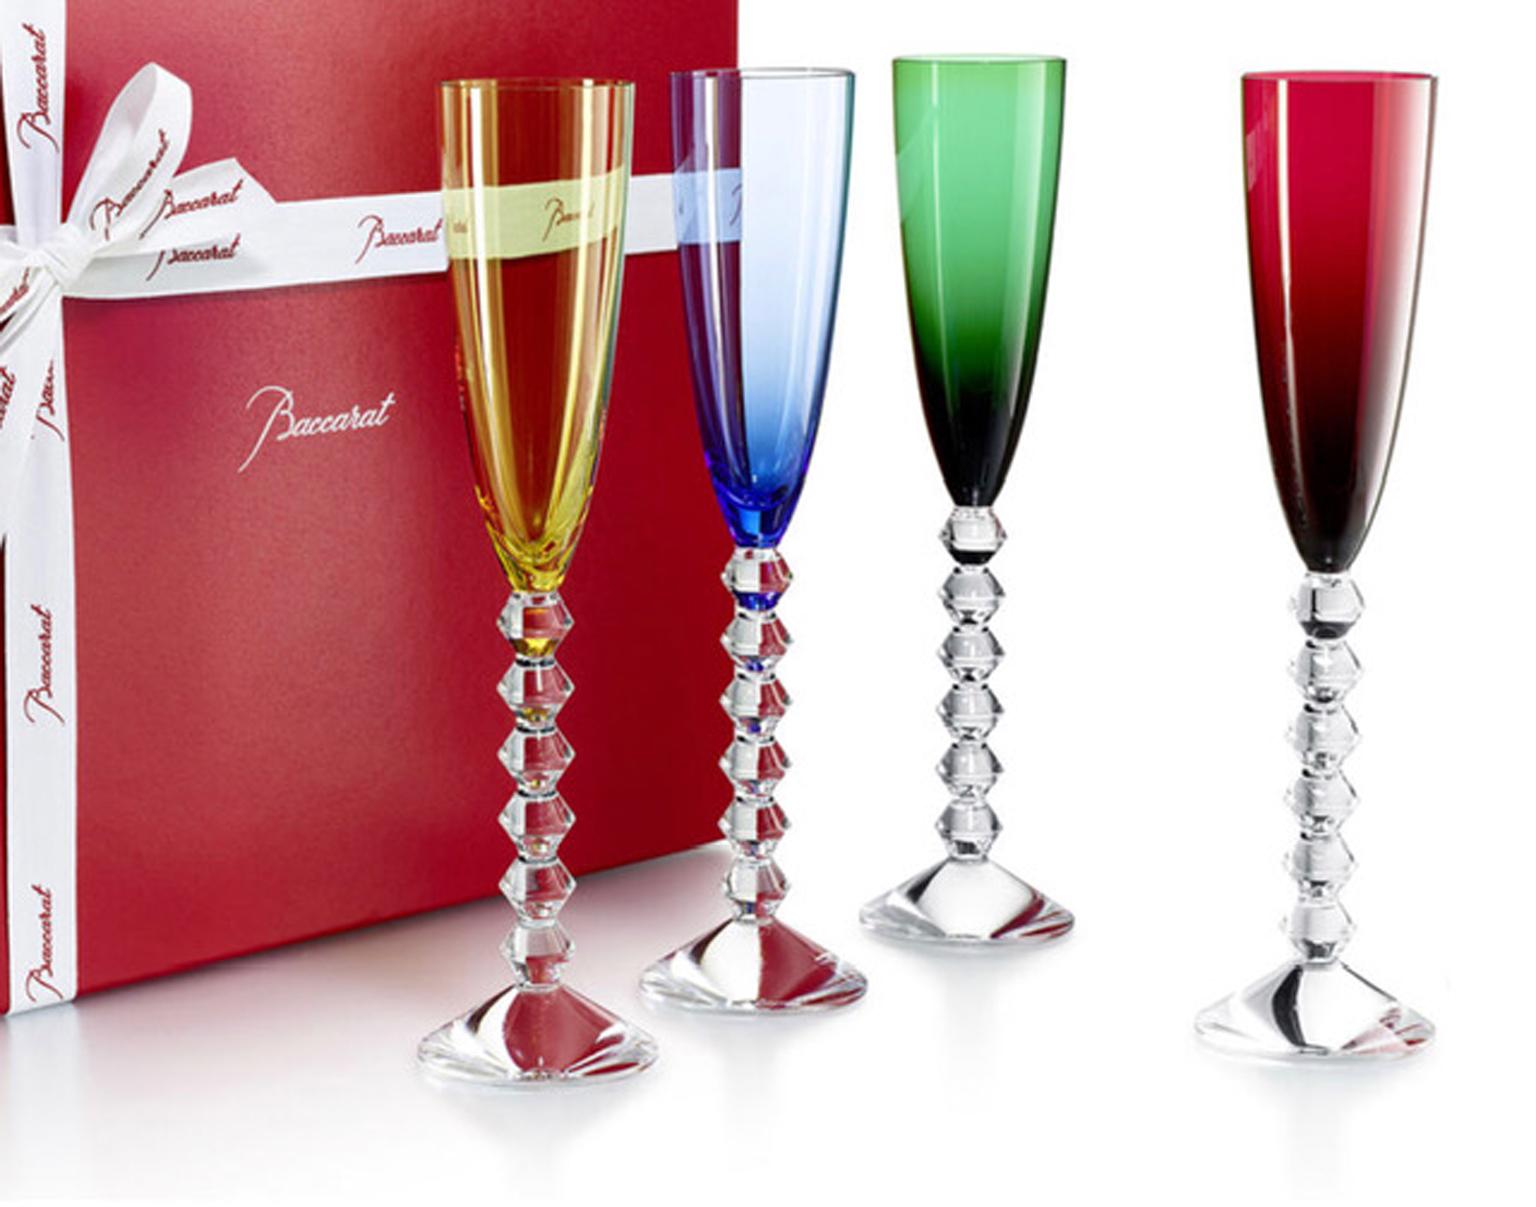 Let's drink in this wonderful crystal glasses!
It will become a remarkable experience. By touching the real Baccarat crystal it is possible to understand that it is a warm crystal.